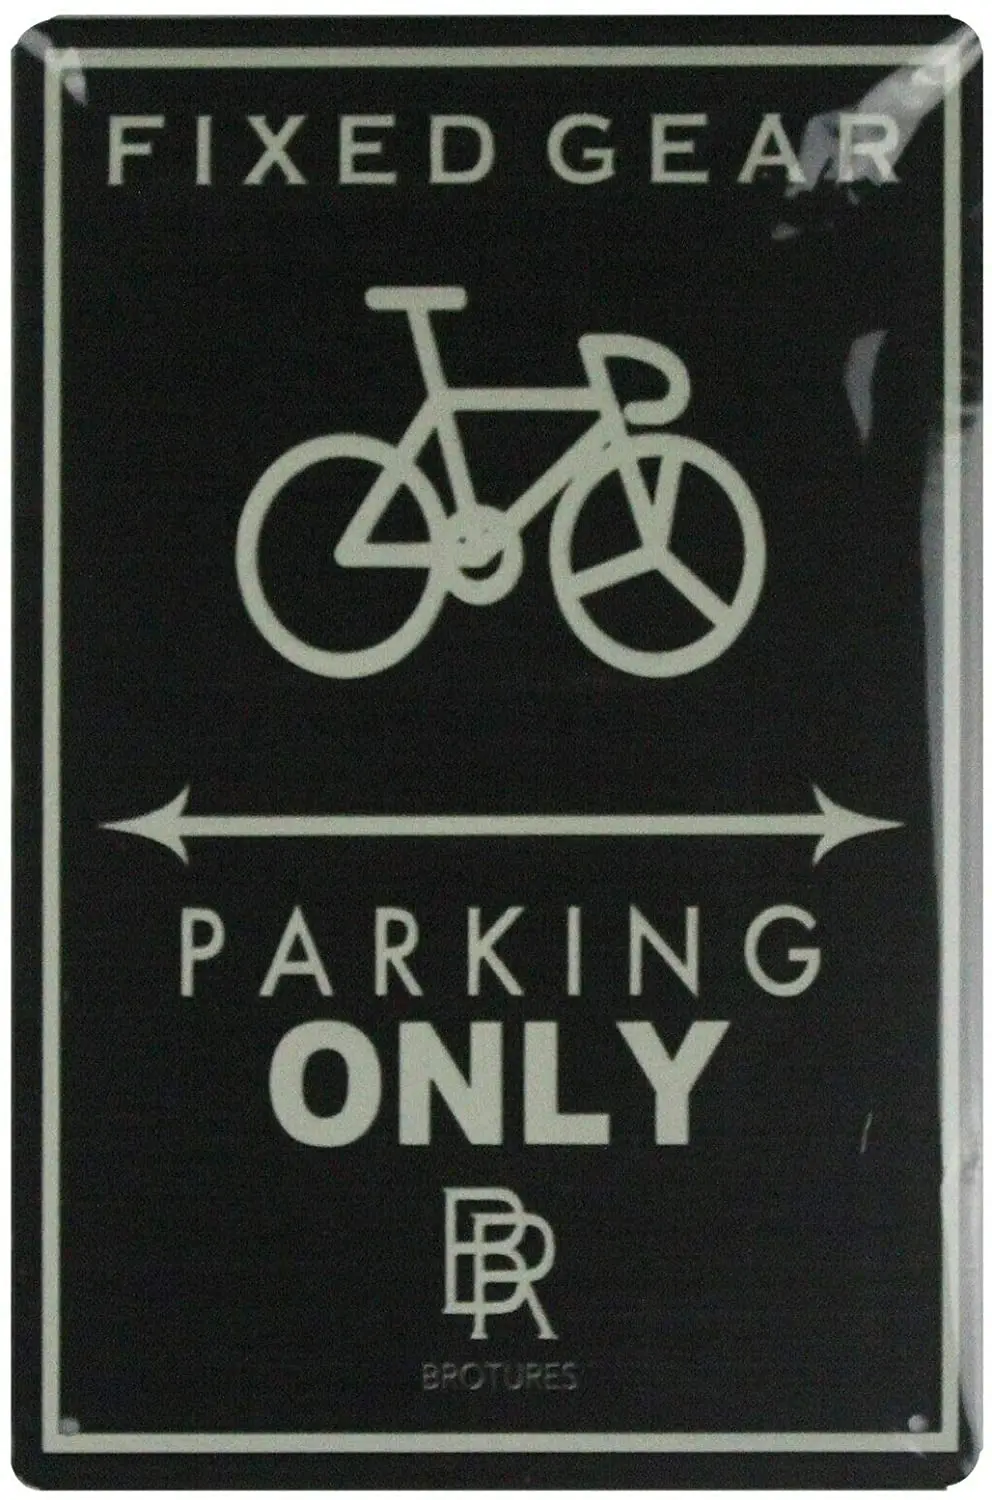 

Retro Art Fixed Gear Parking Only Tin Metal Sign Beautiful Wall Art Bedroom Home Decoration Vintage Mural Dimensions 20x30 cm